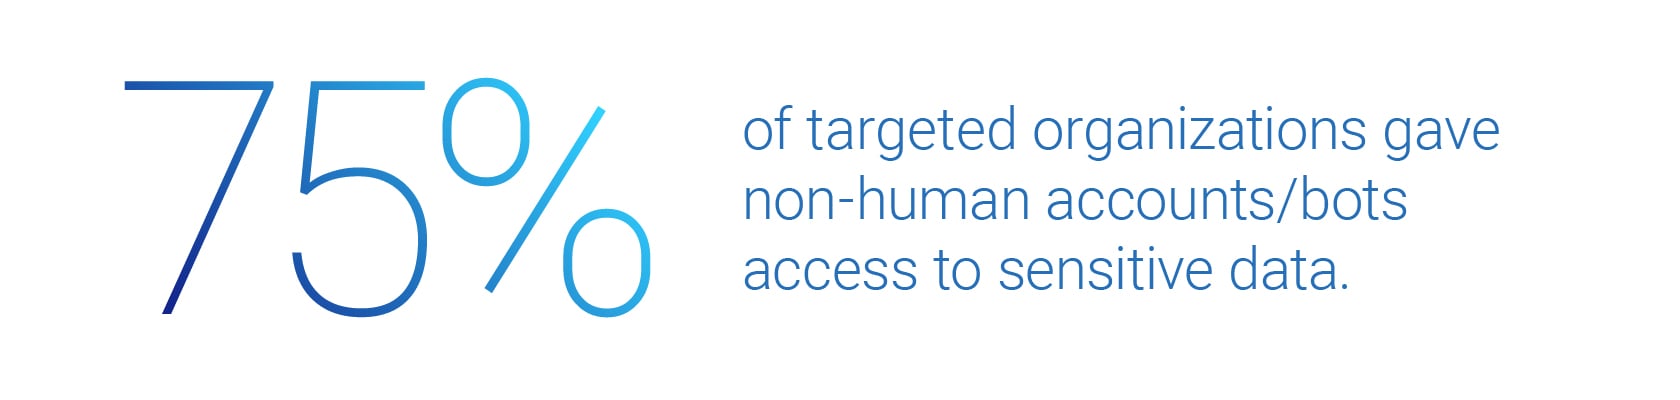 75% of targeted orgs gave sensitive access to bots